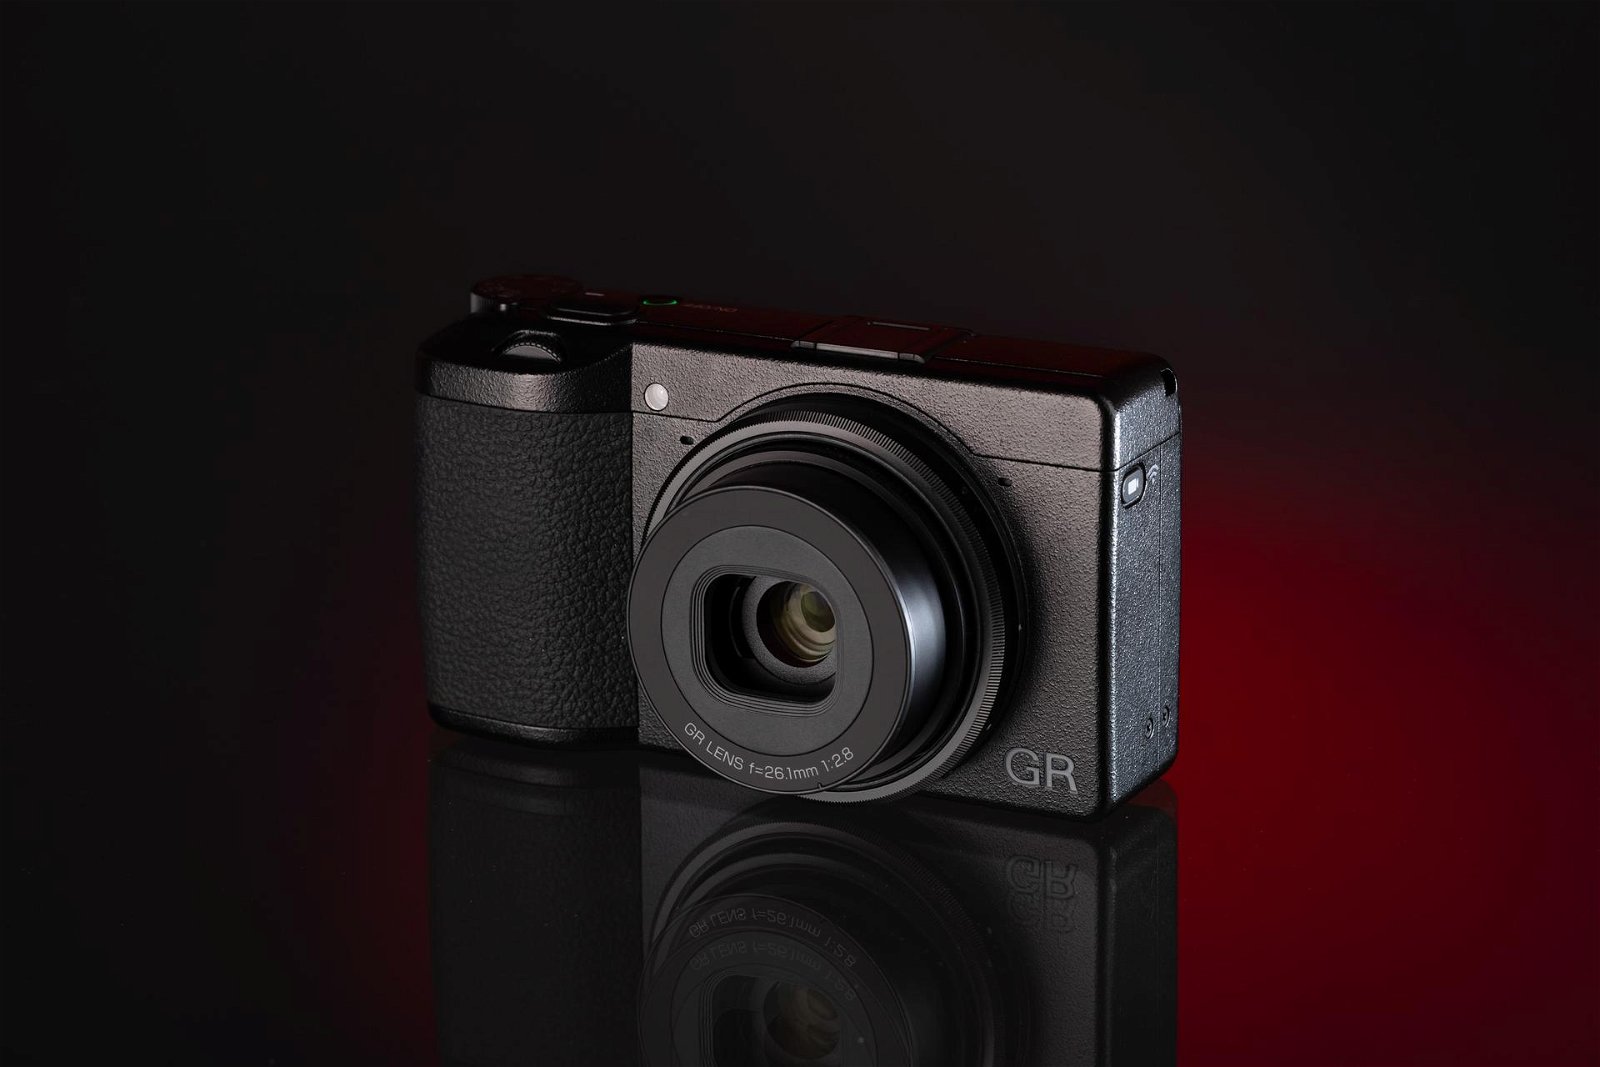 Ricoh GR IIIx Compact Camera for Travel